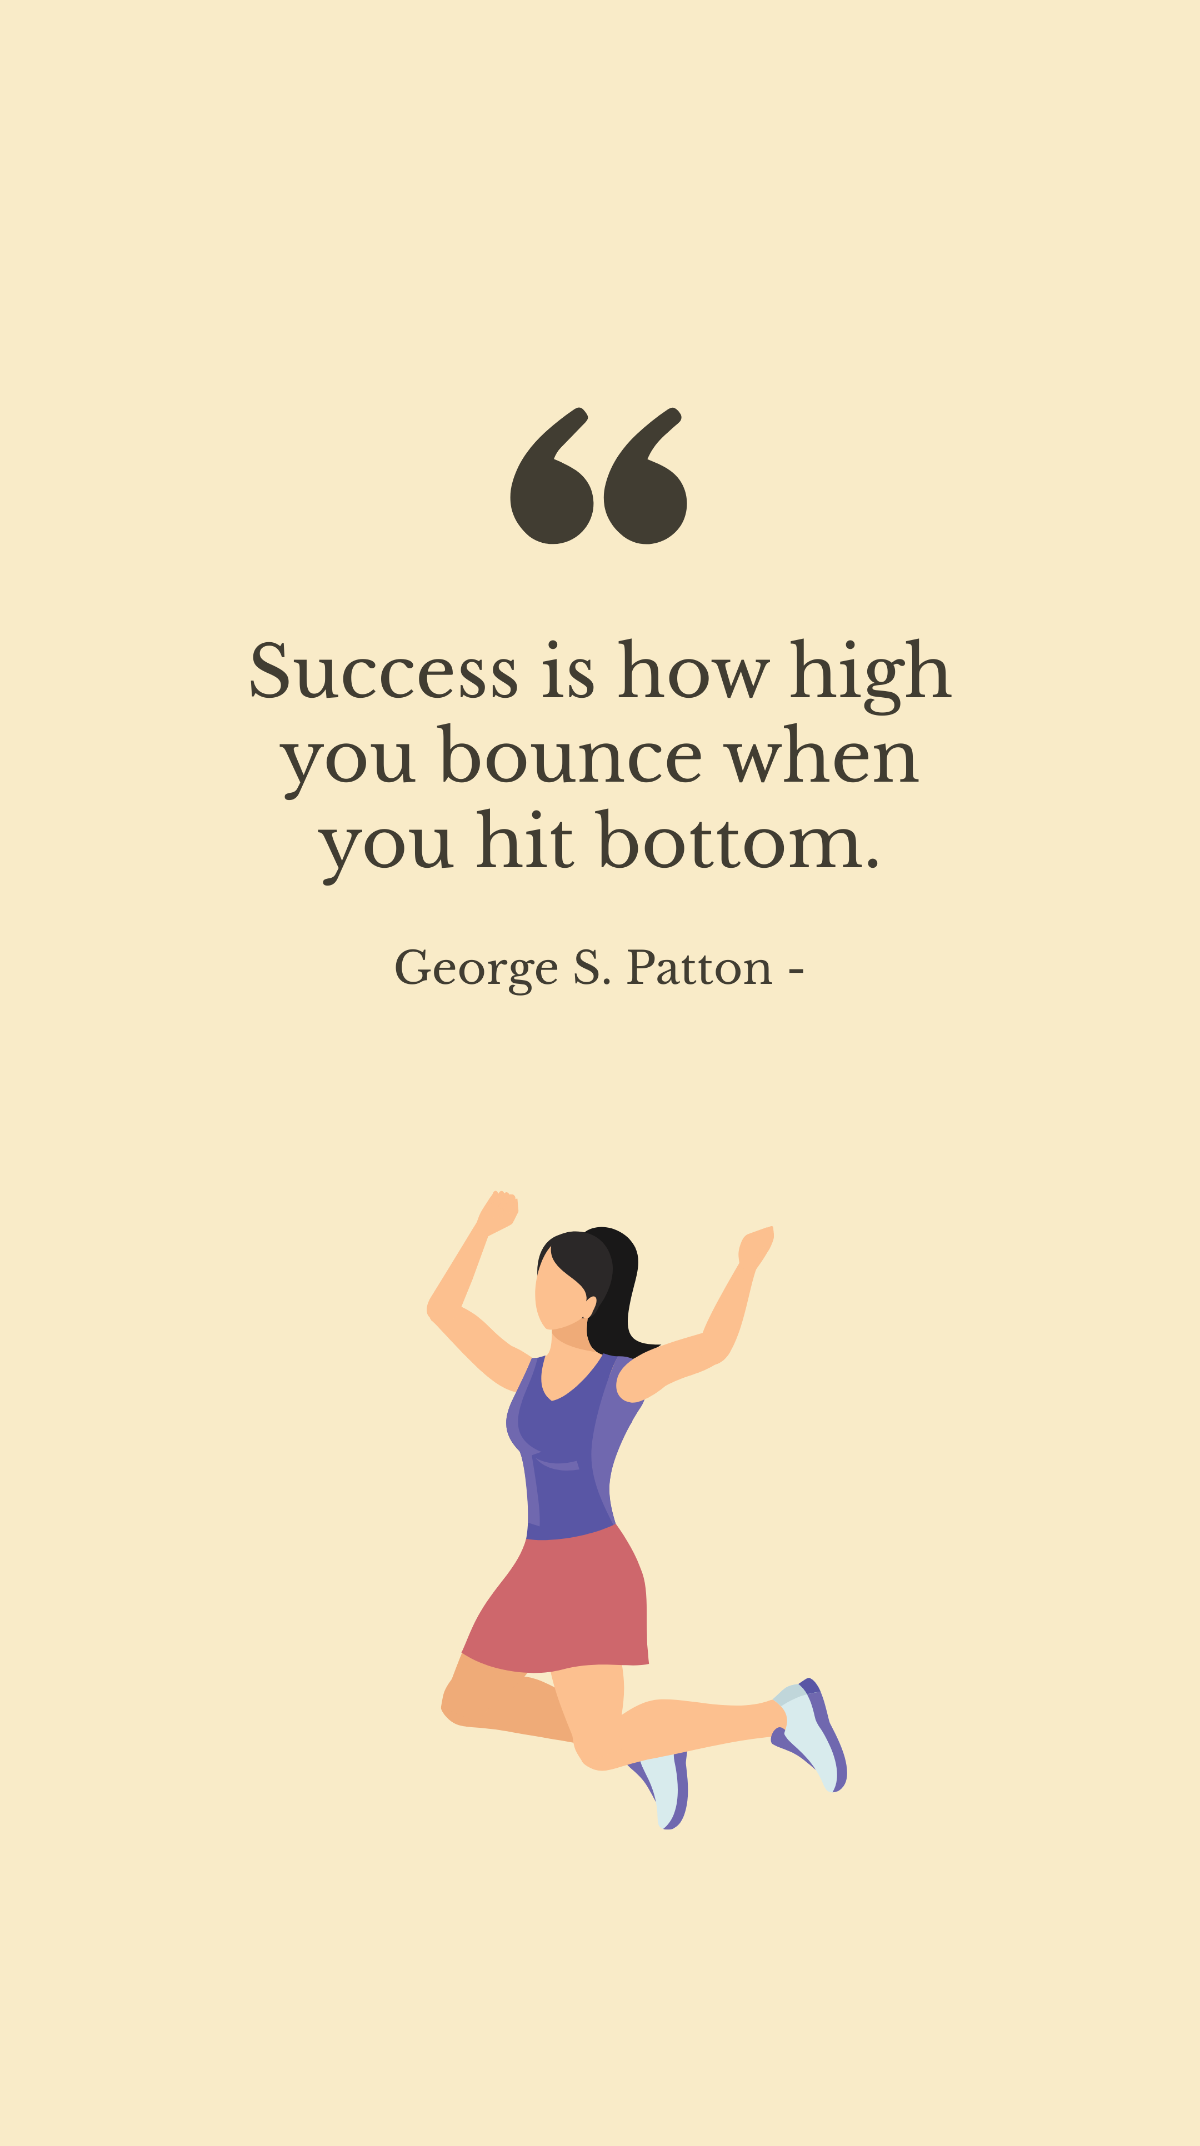 George S. Patton - Success is how high you bounce when you hit bottom. Template